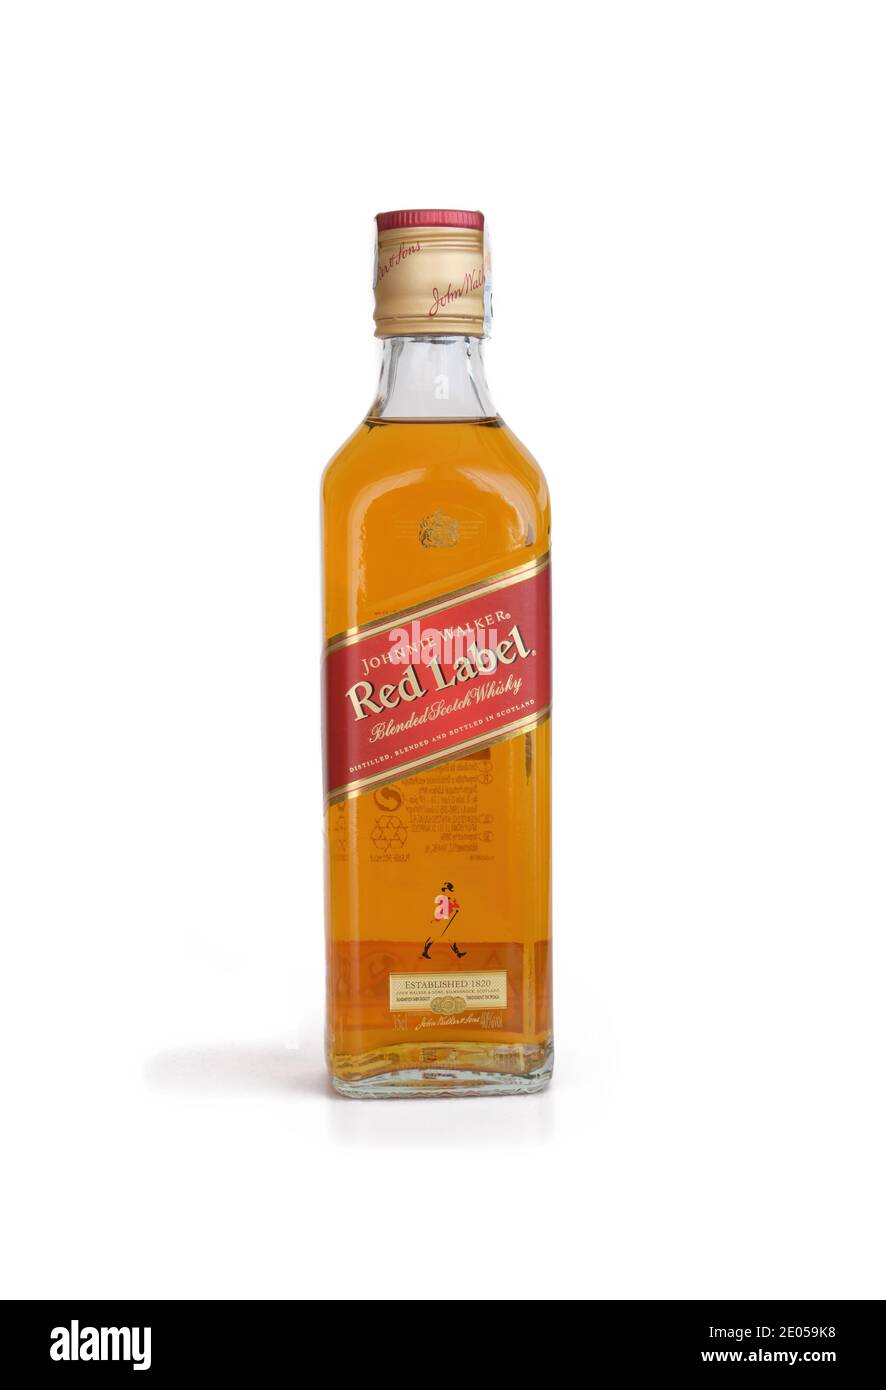 35CL Bottle of Johnnie Walker Red Label Whisky, a brand of Scotch whisky now owned by Diageo that originated in the Scottish burgh of Kilmarnock Stock Photo